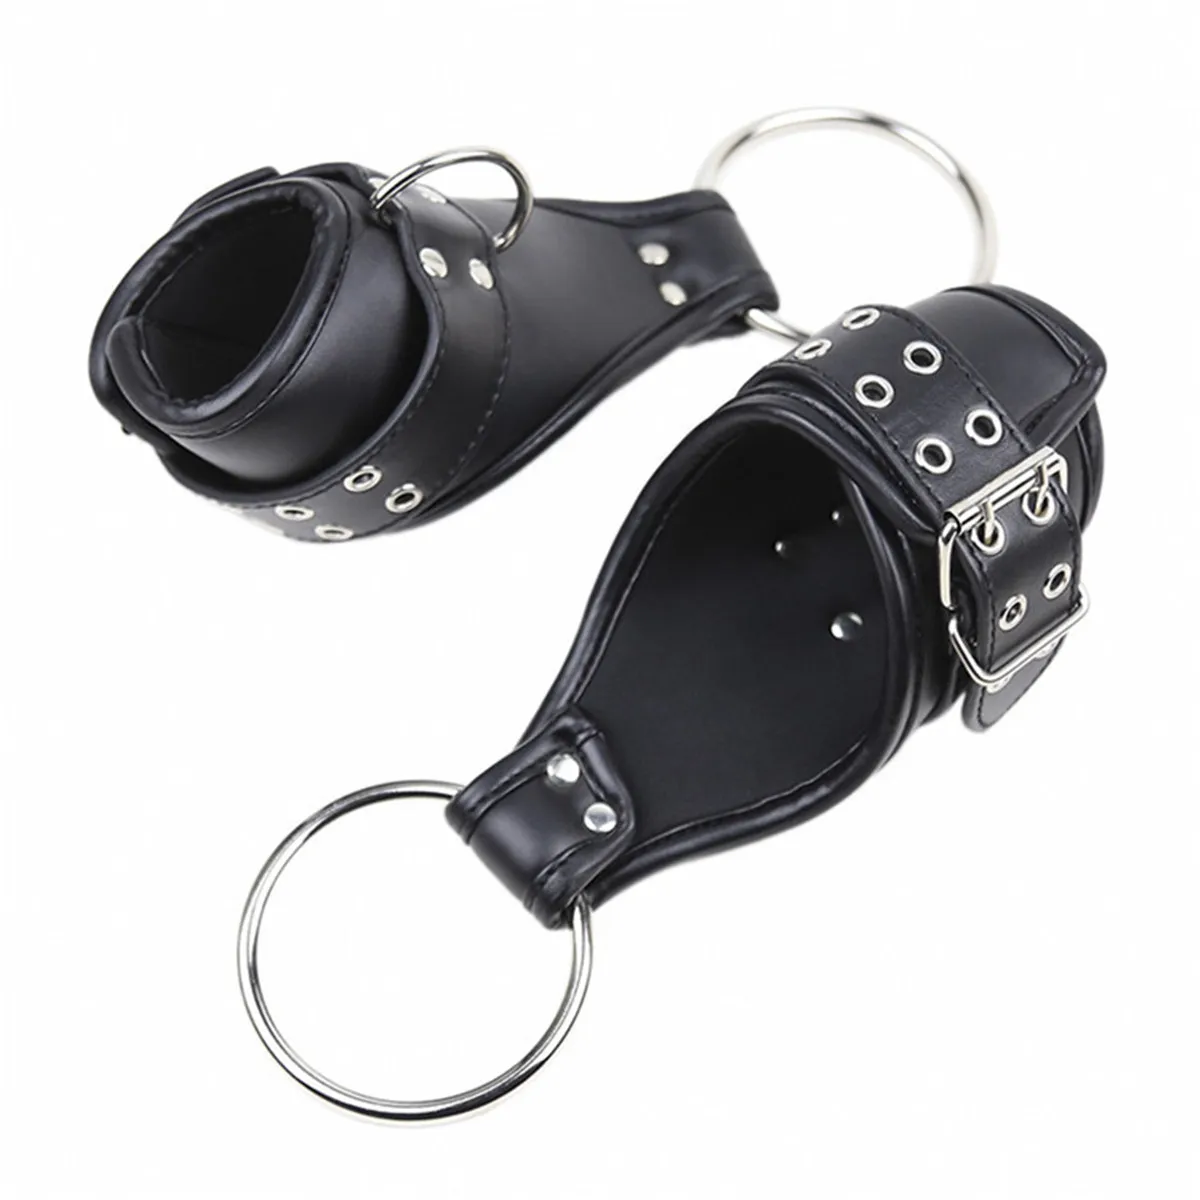 sexy toys for woman Leather Ankle Wrist Suspension Cuffs Restraint BDSM Bondage Strap Keep Suspended Hanging Handcuffs9618025